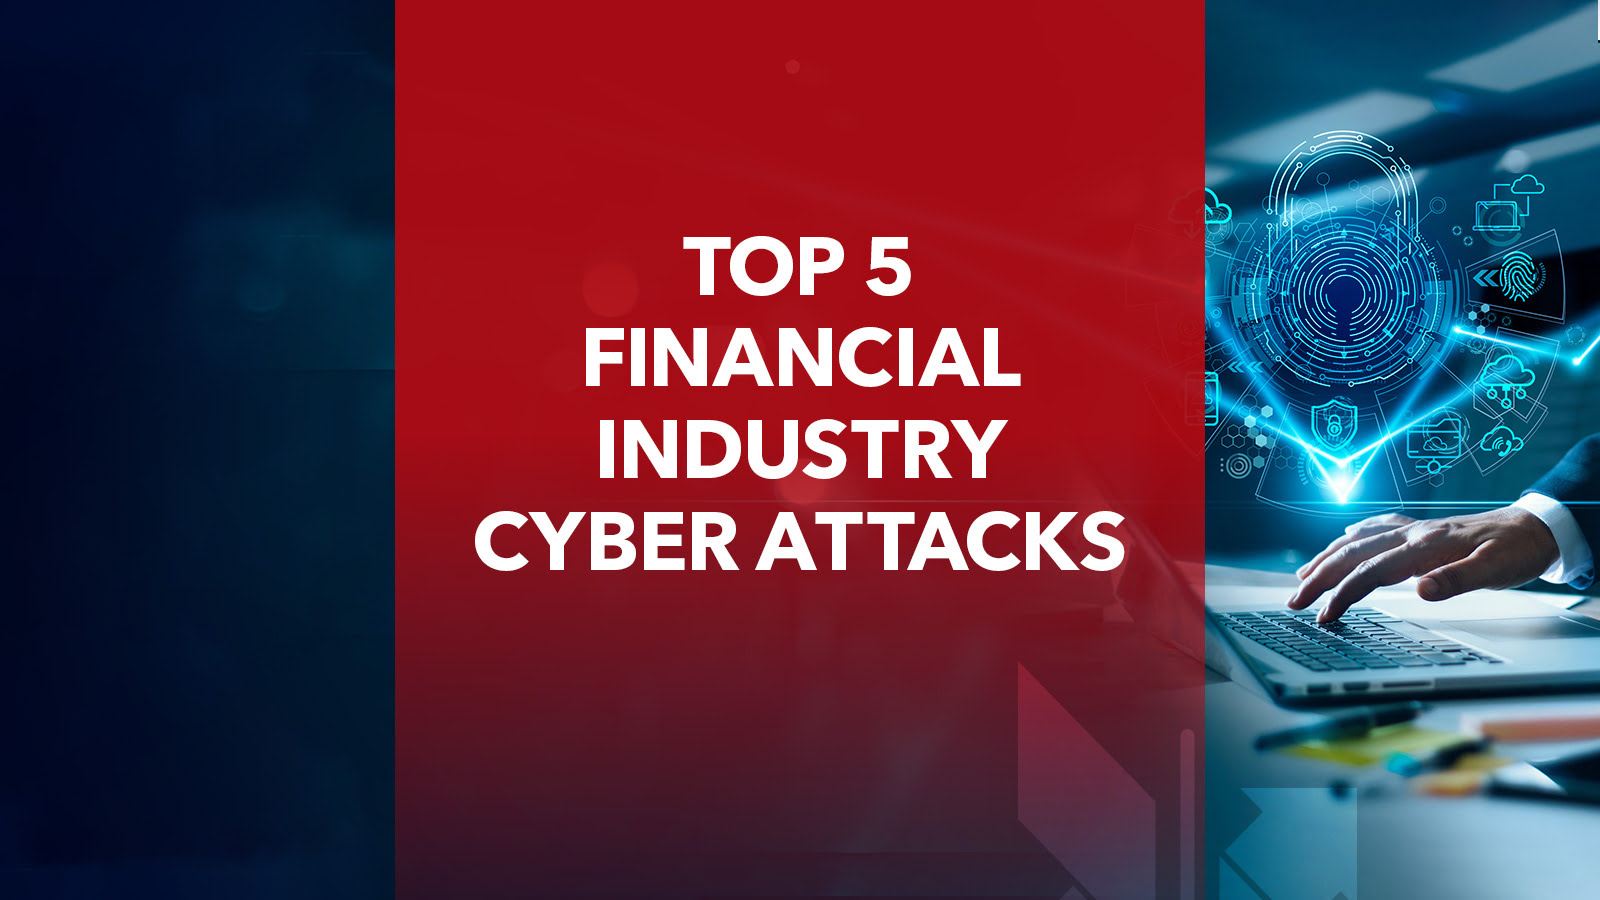 Top 5 financial industry cyber attacks